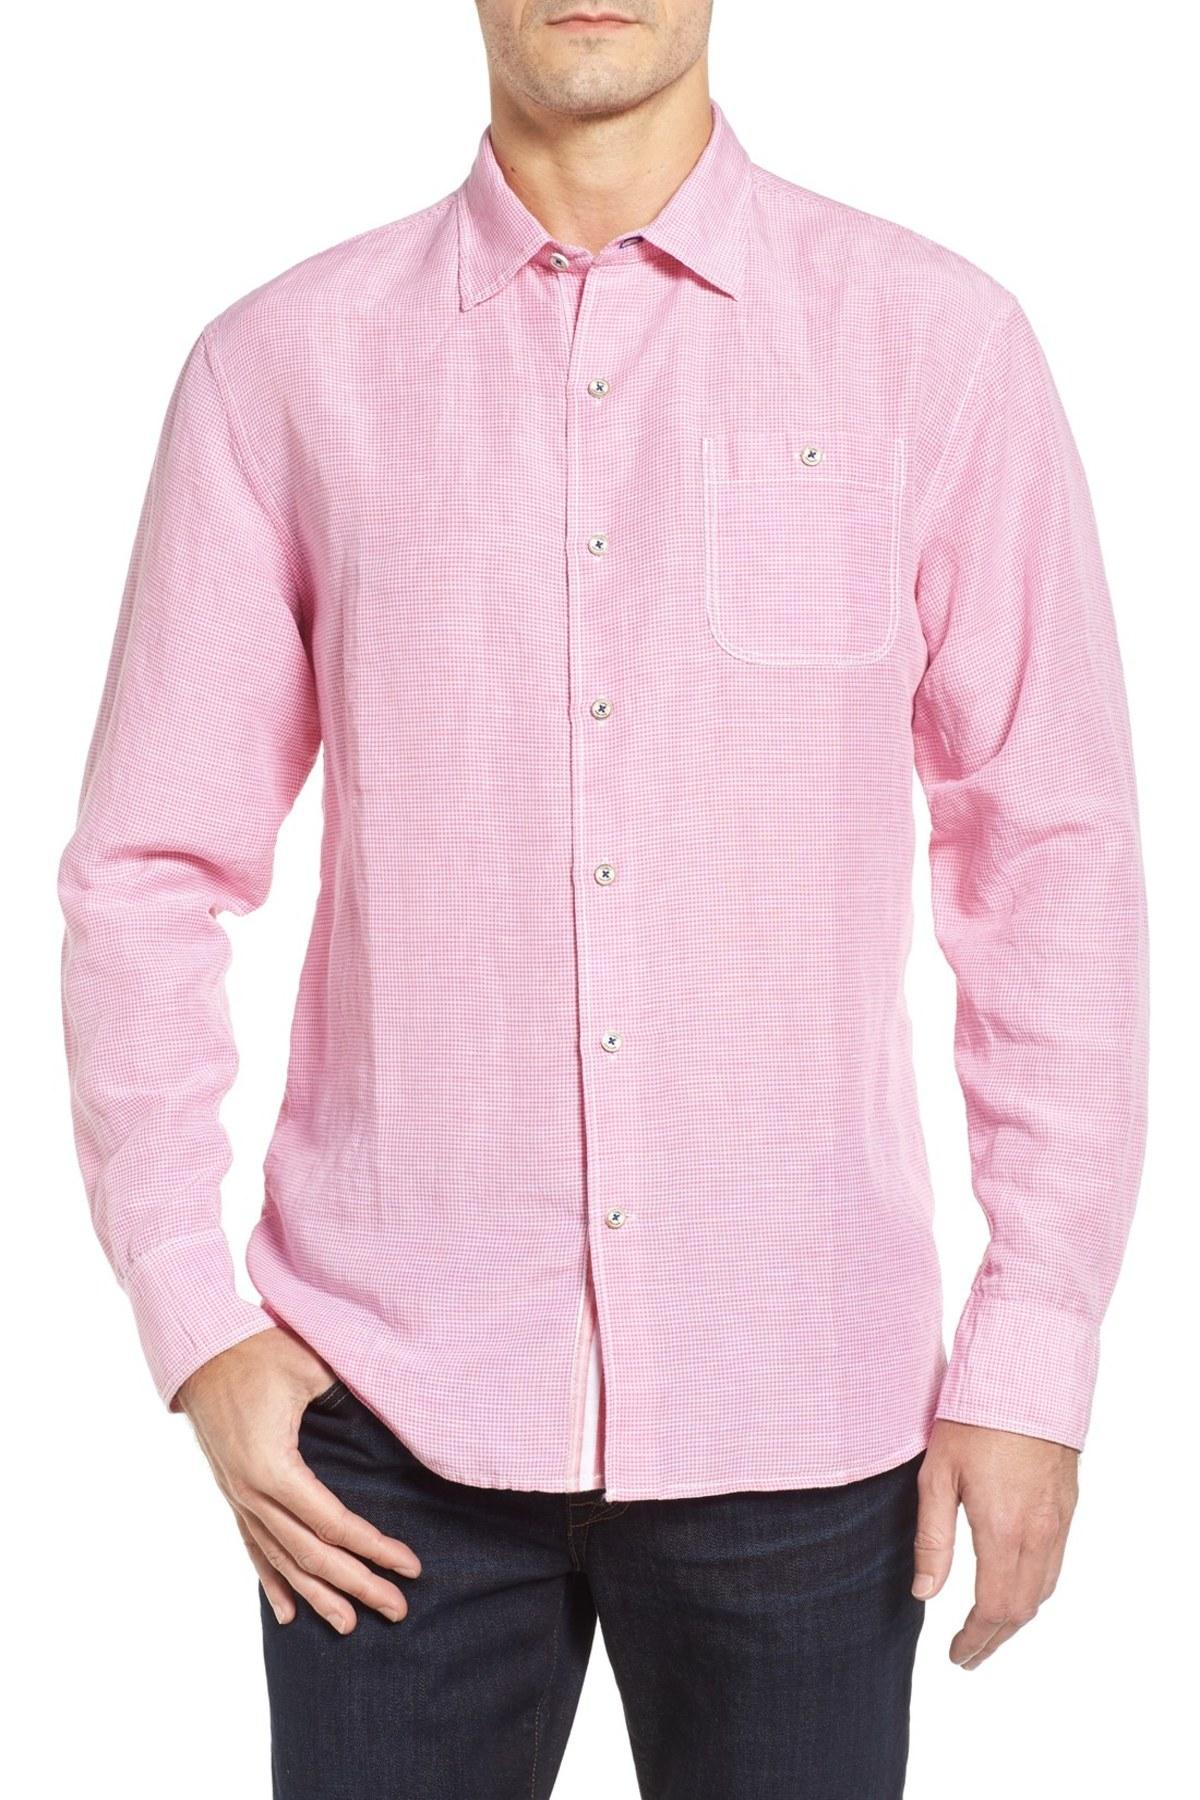 Tommy bahama Check Linen Sport Shirt in Pink for Men - Save 52% | Lyst